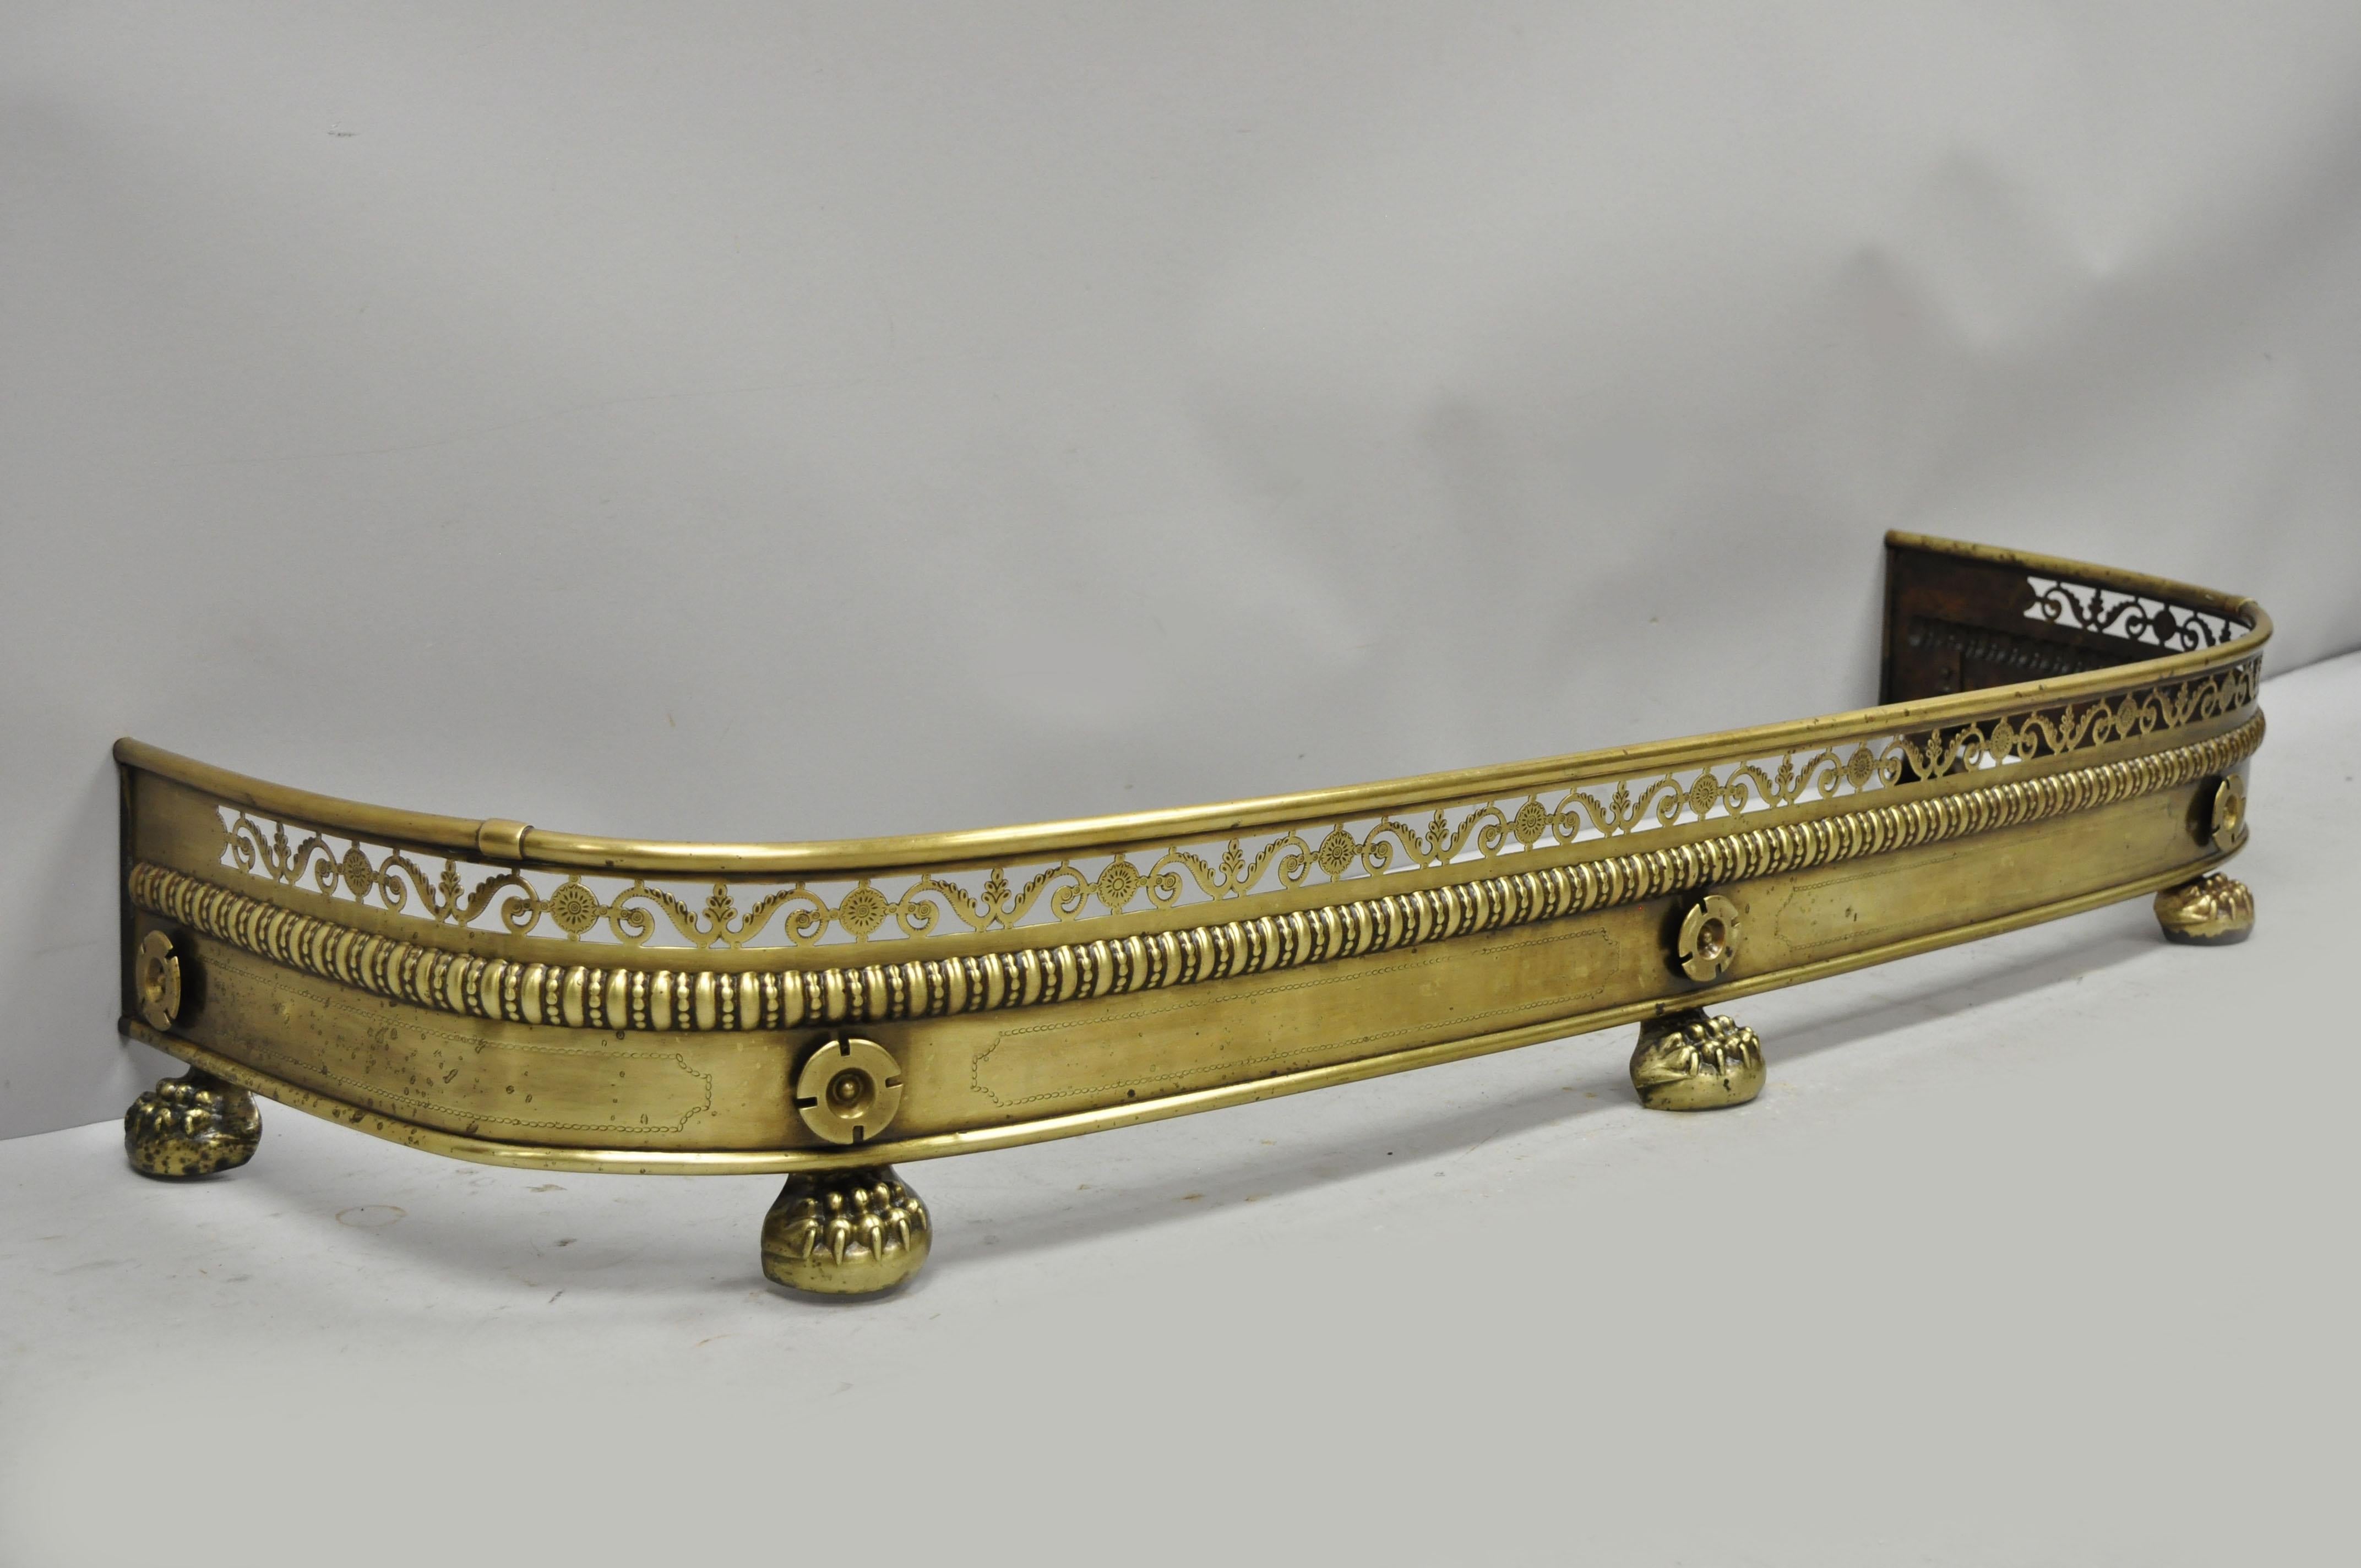 Antique French Empire style paw foot brass pierce decorated fireplace mantel (fireplace) piece, circa late 19th century. Measurements: 7